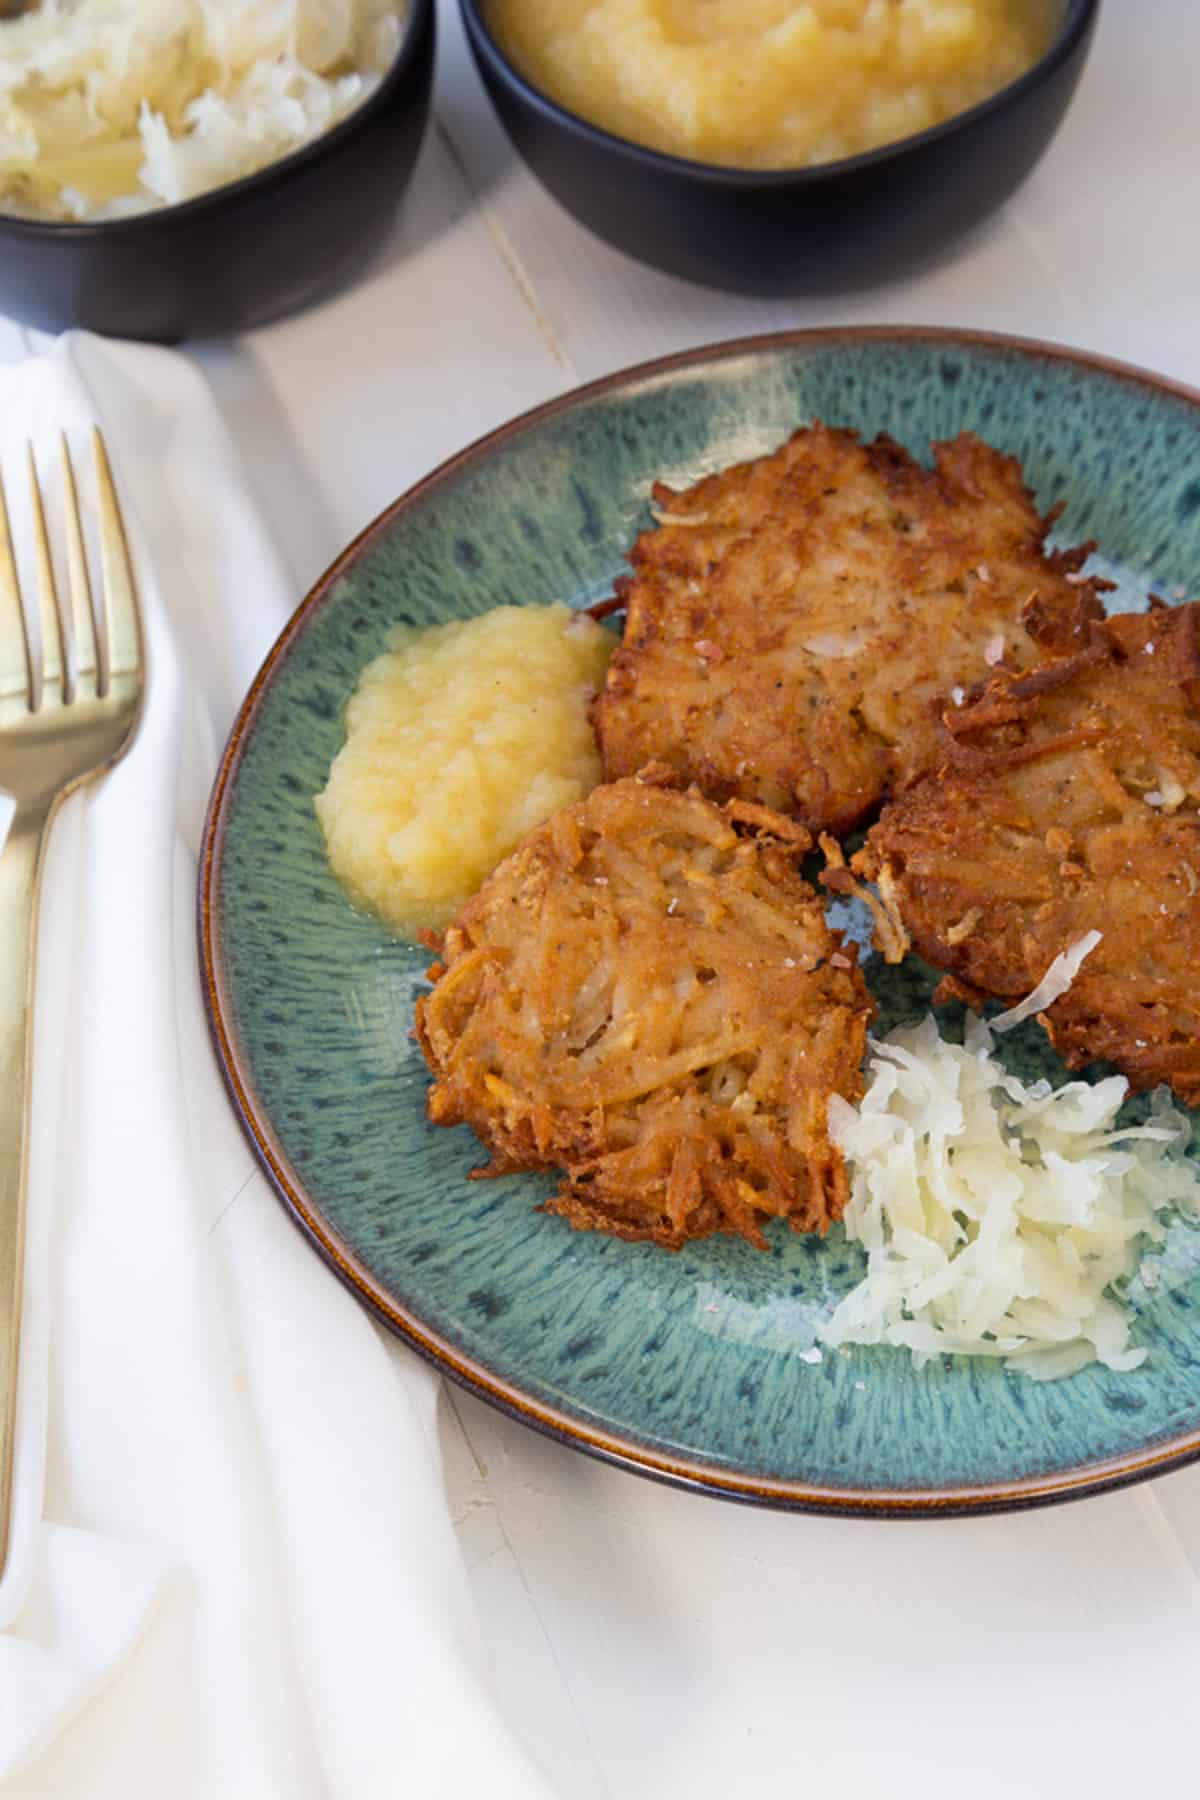 A blue plate with potato pancakes and apple sauce.